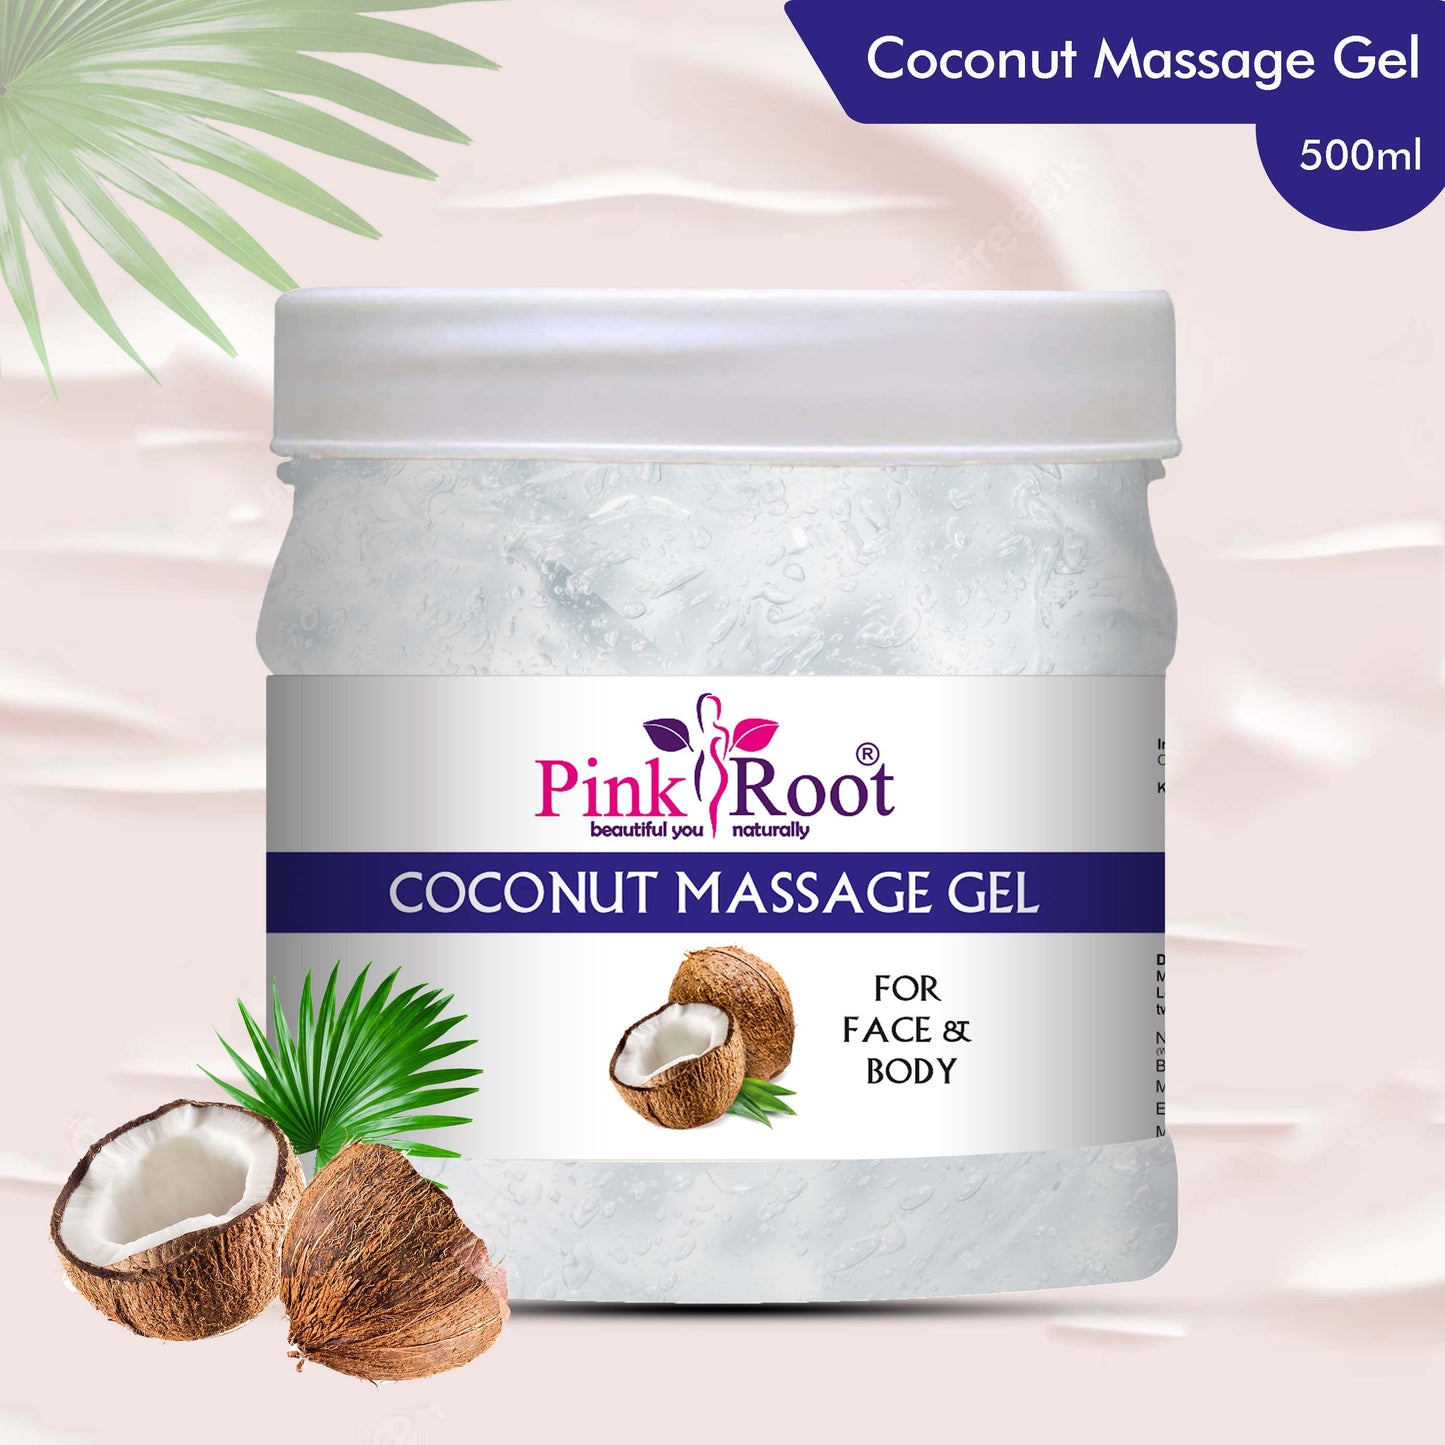 Pink Root Coconut Gel 500ml for Removing Acnes & Pimples, Cleansing of Skin, Moisturising & Nourishment